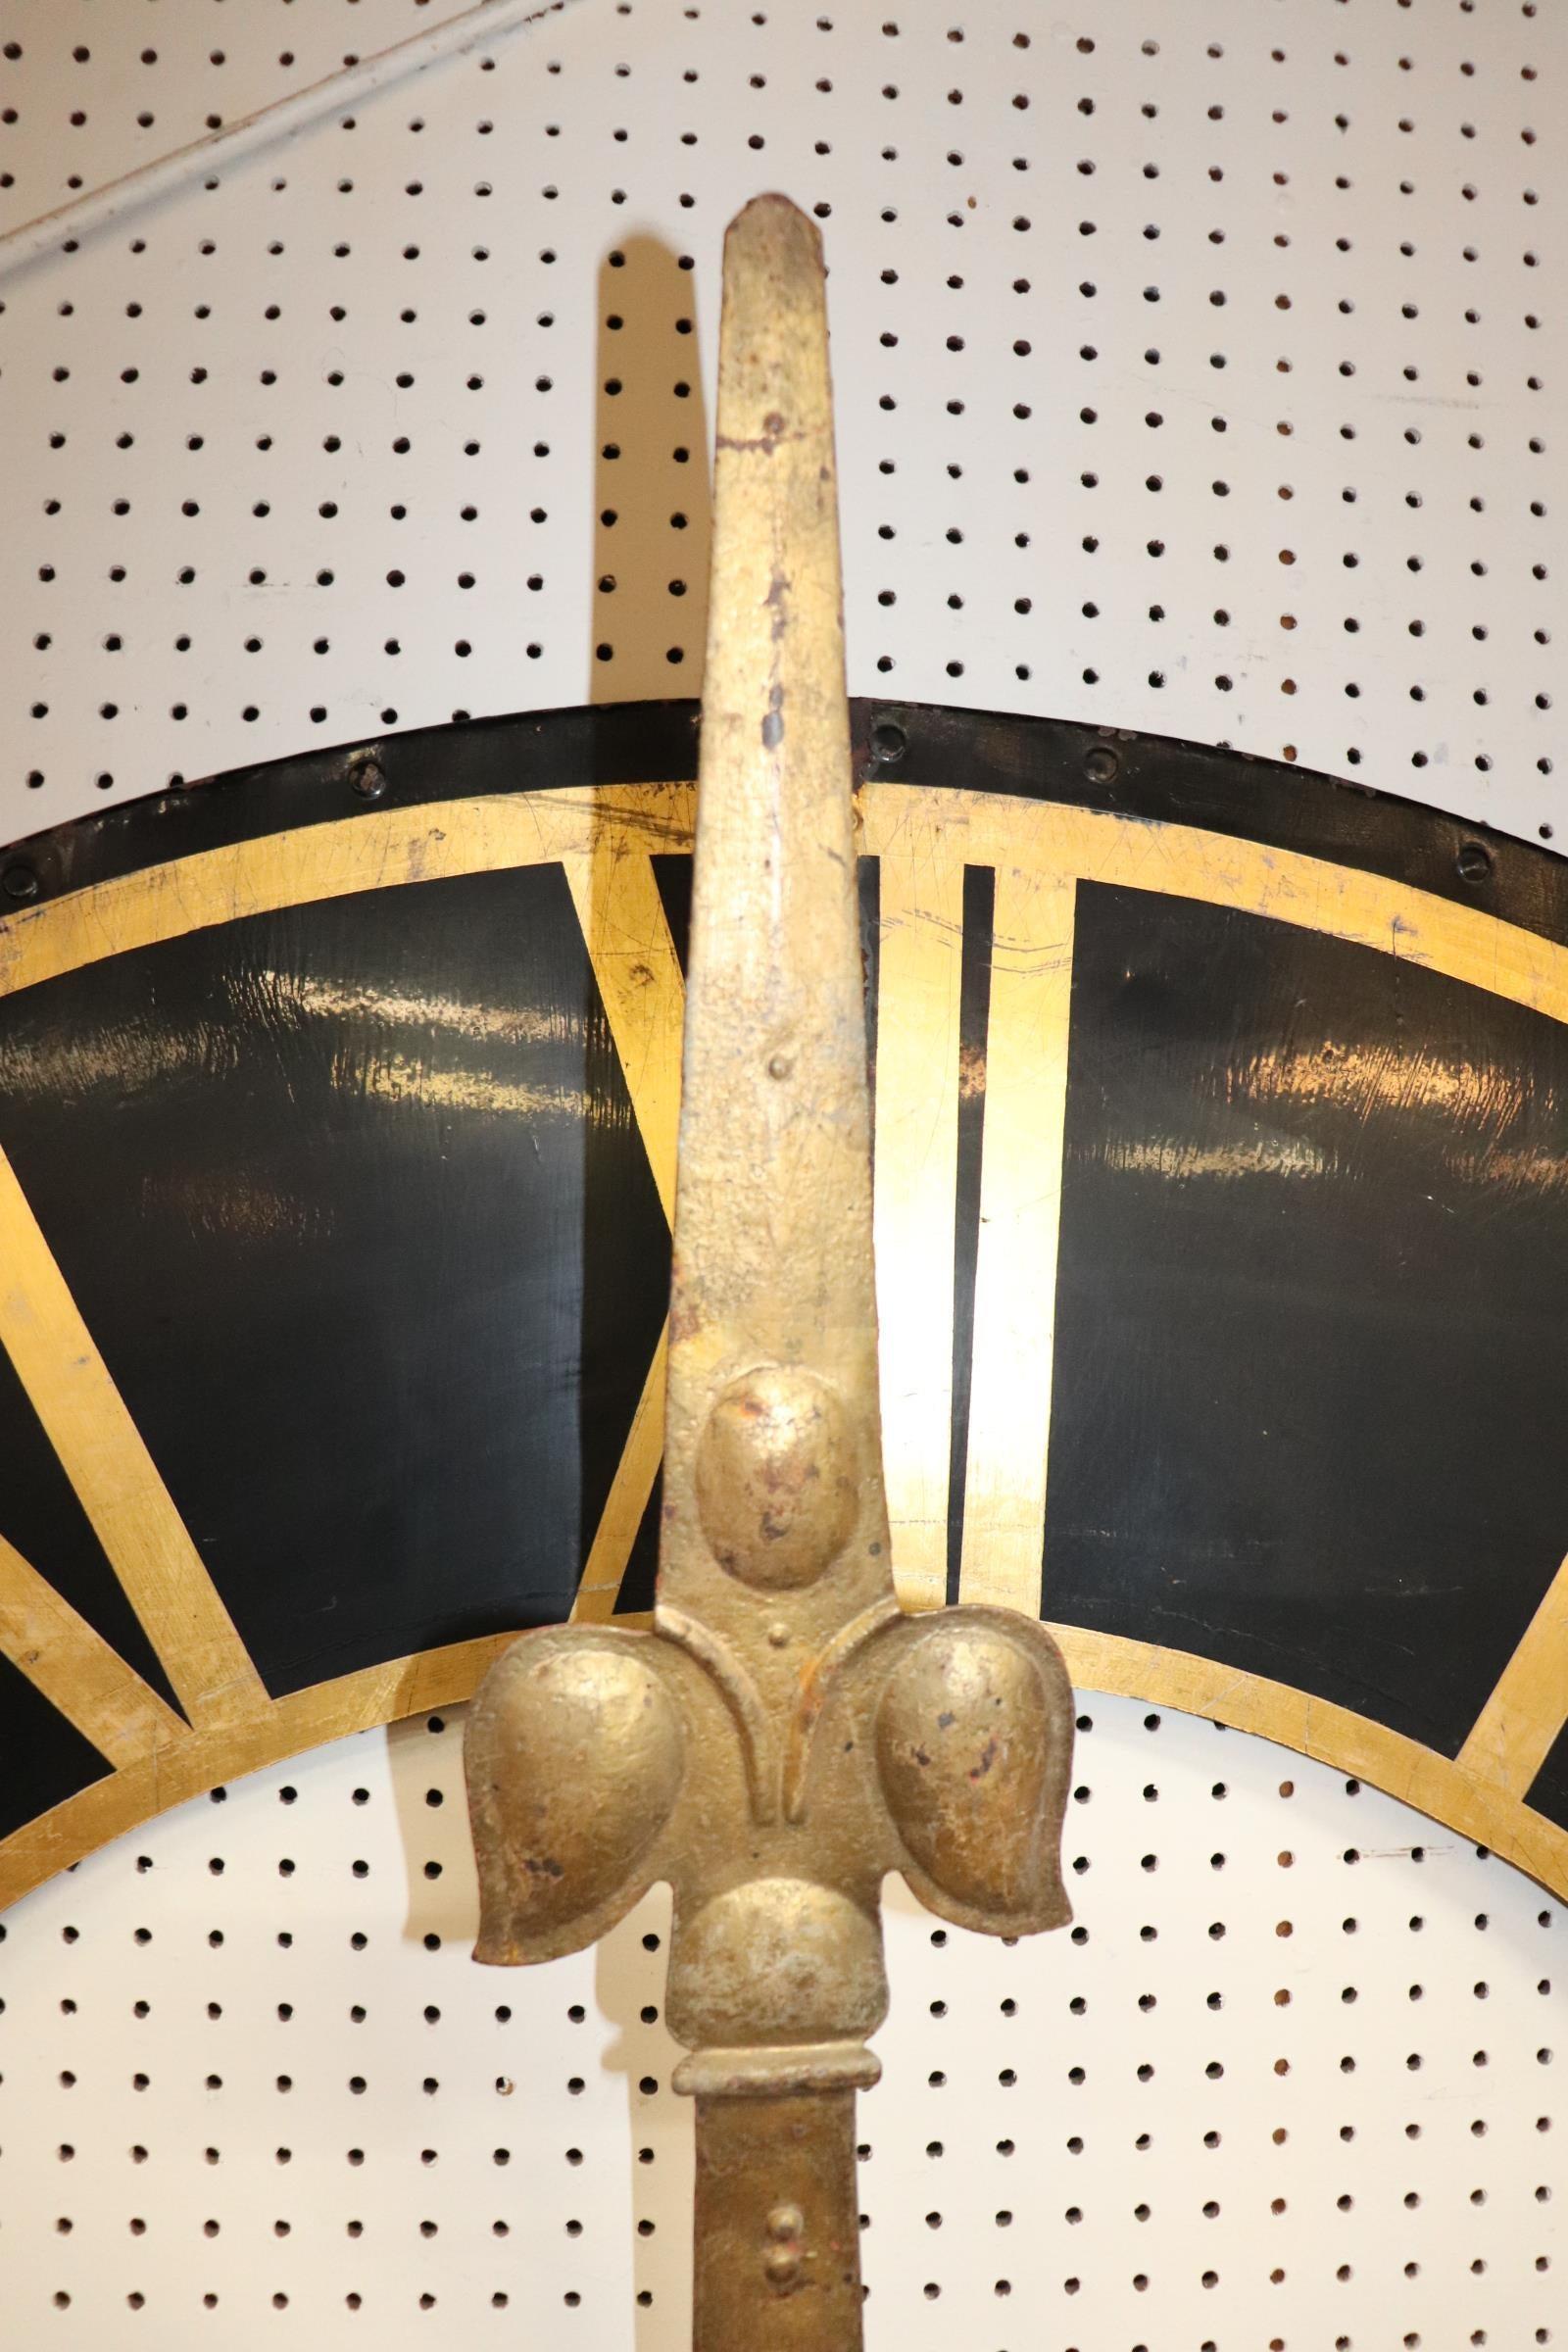 A large clock face measuring over 5 feet in diameter, from a clock-tower or church, 19th century, with gilded Roman numerals.